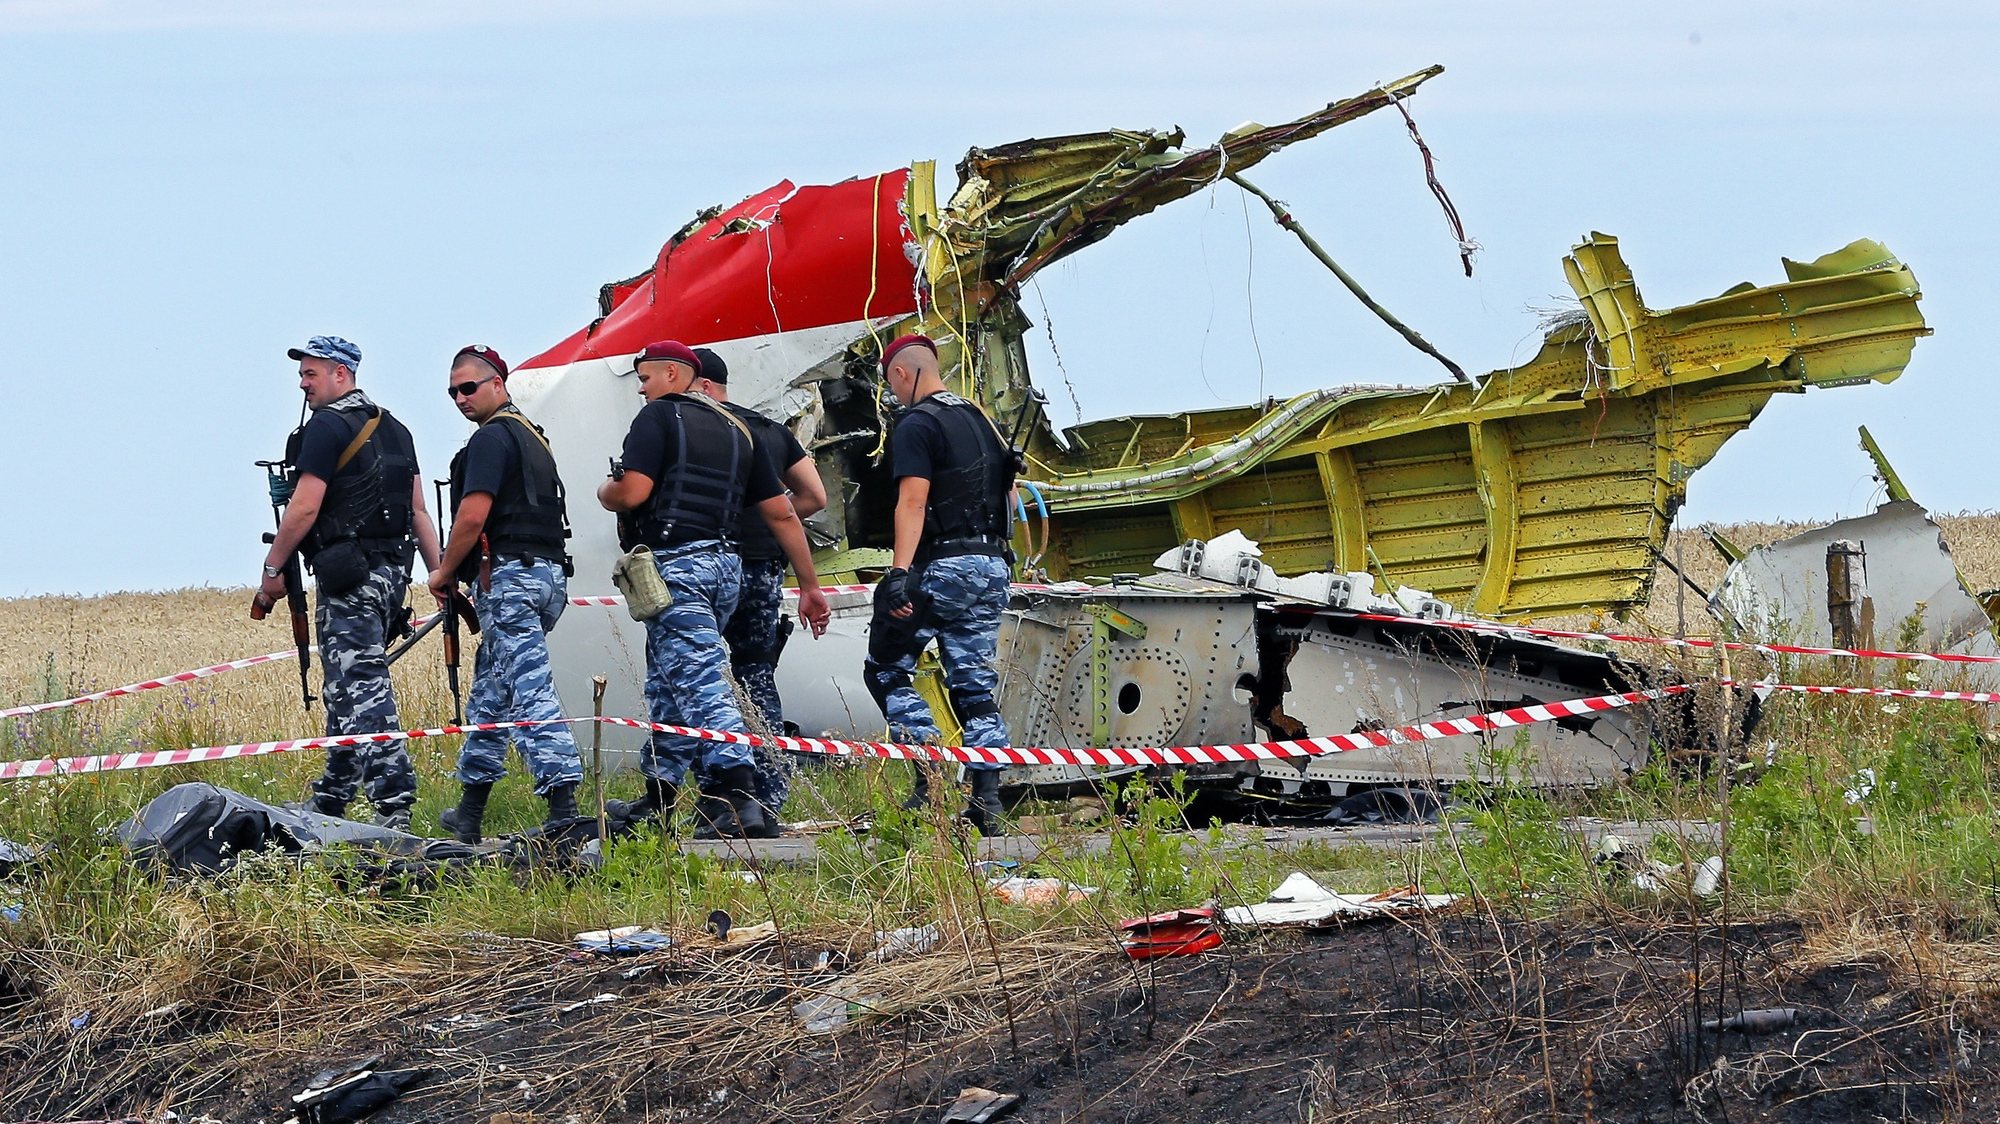 epa08255990  (FILE) - Armed rebel soldiers pass in front of a big piece of debris at the main crash site of the Boeing 777 Malaysia Airlines flight MH17, which crashed while flying over the eastern Ukraine region, near Grabovo, some 100 kilometers east from Donetsk, Ukraine, 19 July 2014. 
The District Court in The Hague on 09 March 2020 is due to start a trial against four people believed of being involved in the shooting down of a civil Boeing 777 plane over Ukraine on 17 July 2014. Dutch prosecutors charge three people with Russian citizenship and a Ukrainian national over the downing of Malaysia Airlines Flight MH17 from Amsterdam to Kuala Lumpur in which 283 passengers and 15 crew members on board were killed. Most of the victims were Dutch, Malaysian and Australian nationals. A Joint Investigation Team (JIT) from Belgium, Ukraine, Australia and Malaysia in their report came to the conclusion that a Russian-made BUK missile that hit the plane was fired from territory controlled by pro-Russian rebels. Russia has denied any responsibility for the downing and blamed Ukraine for the tragedy. It is not expected that the four accused will attend the trial as Russian law would prohibit their extradition.  EPA/ROBERT GHEMENT *** Local Caption *** 51488376